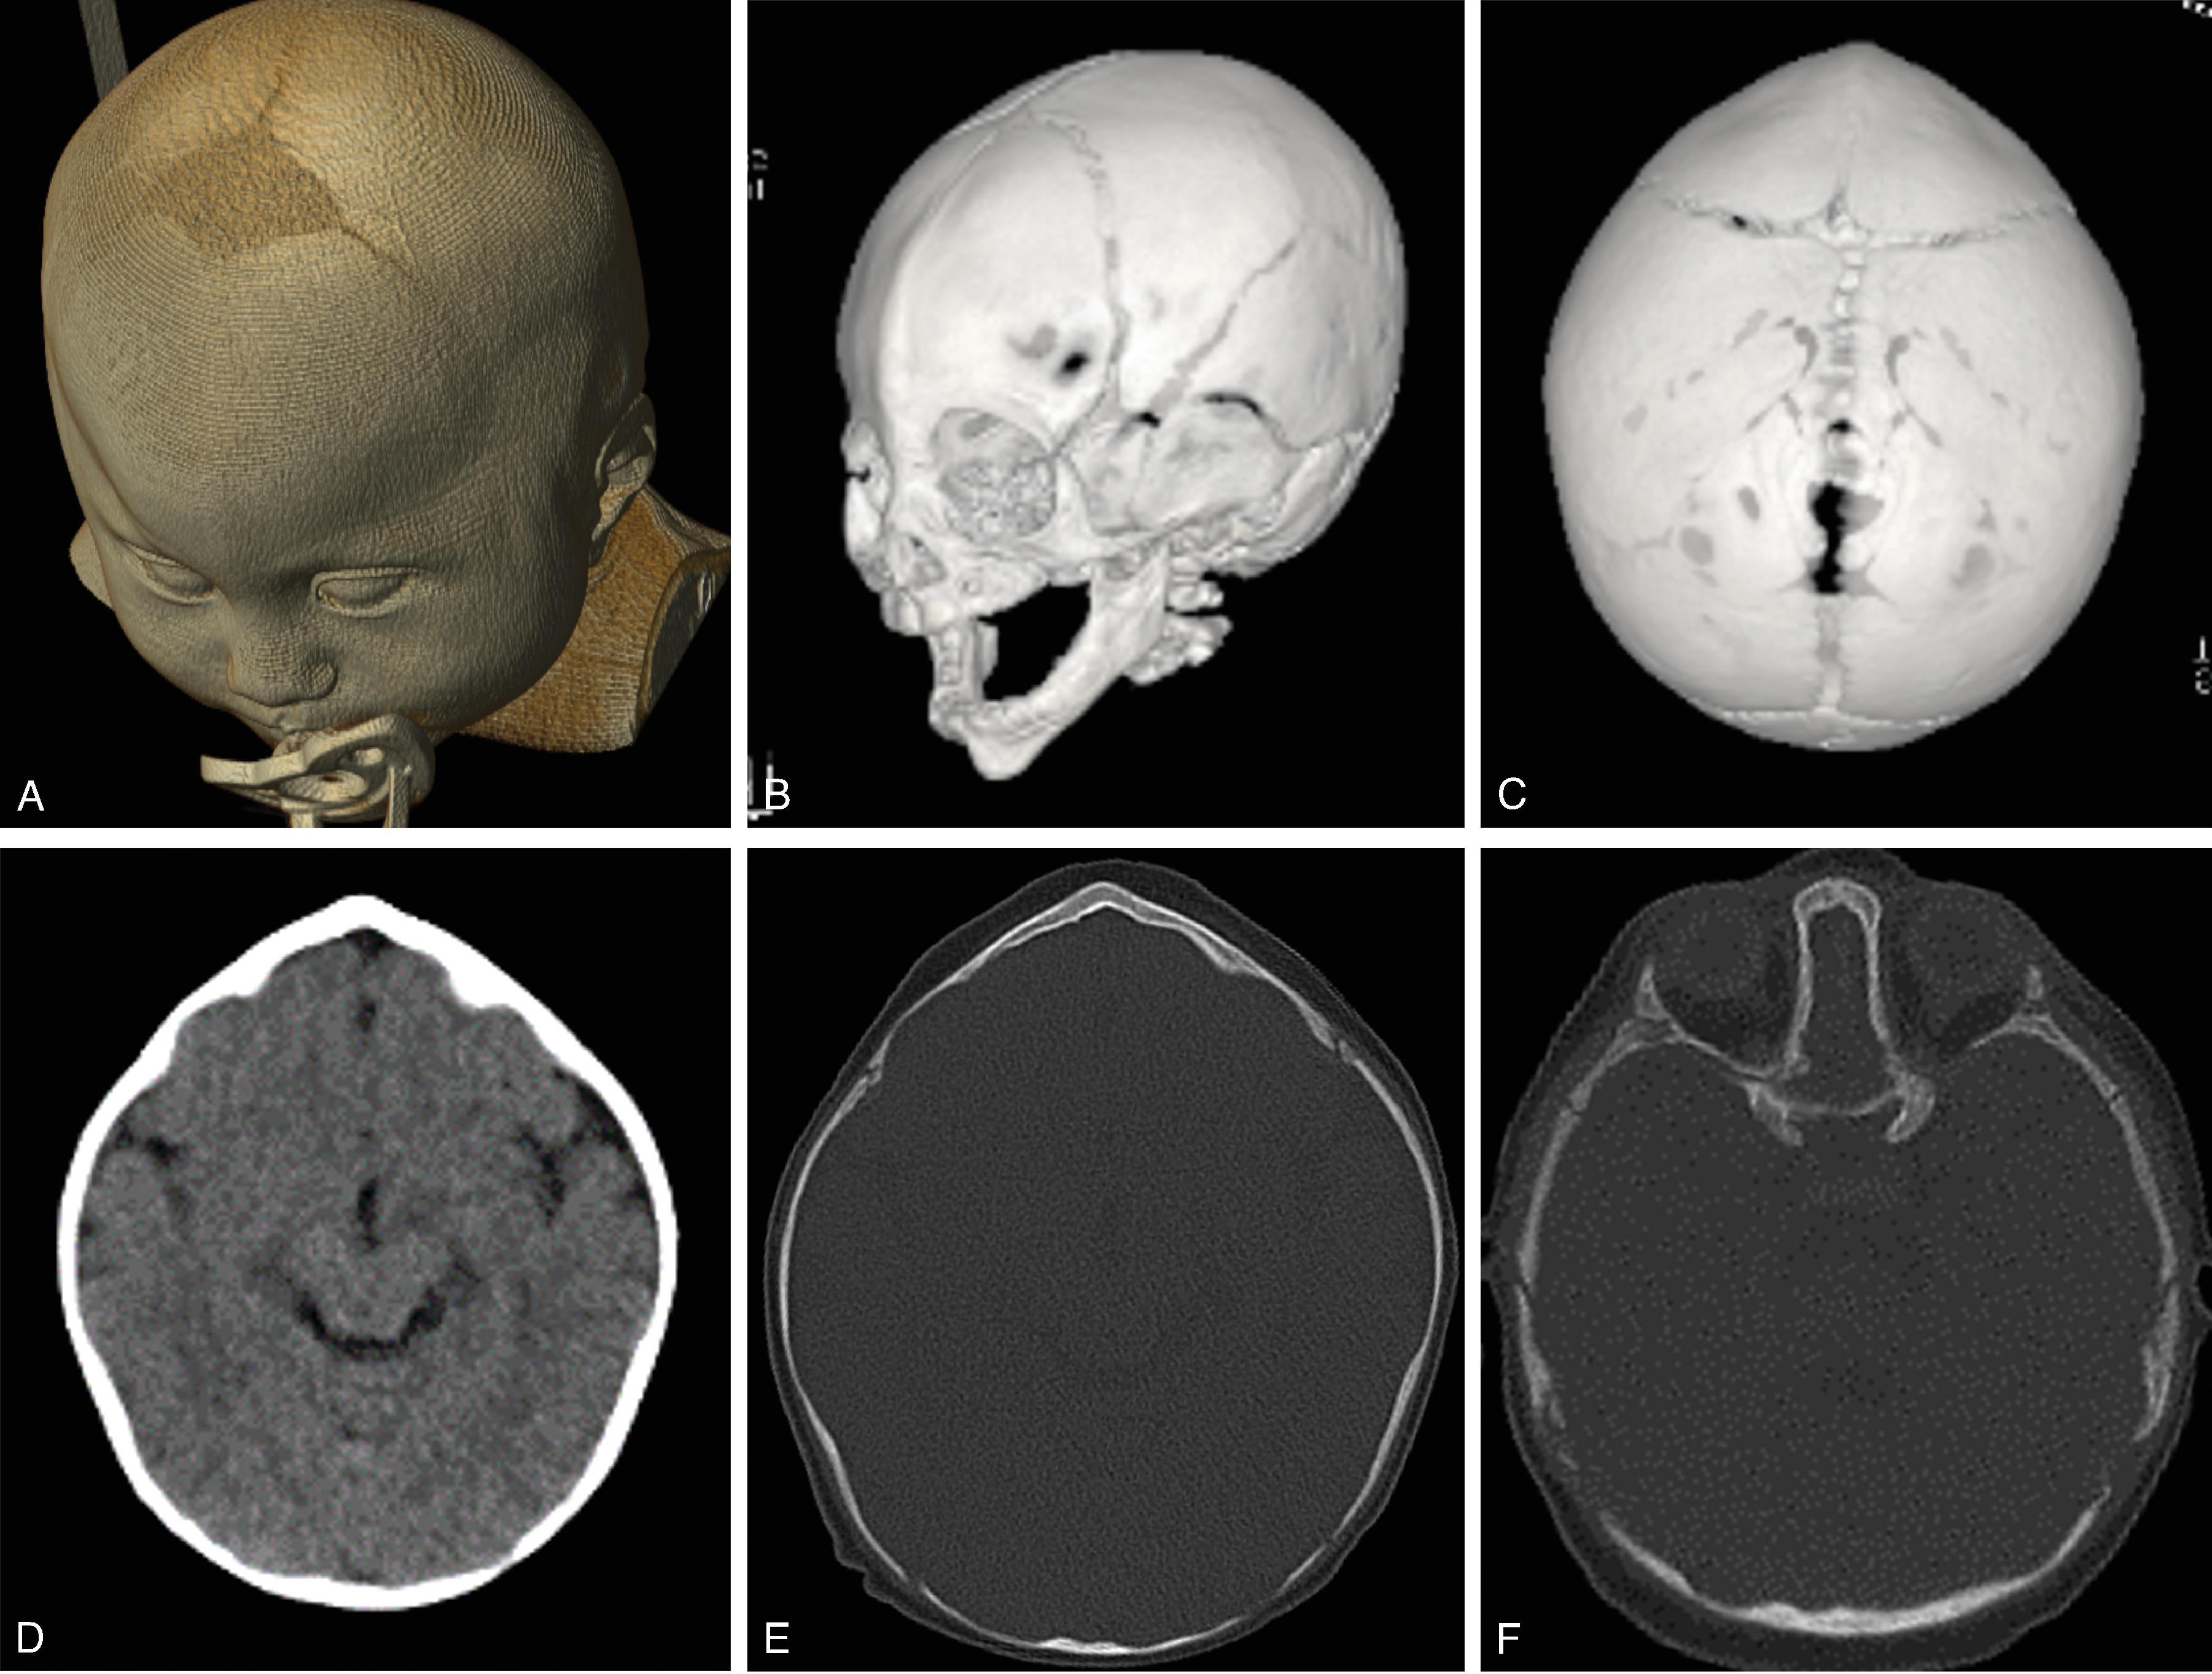 Fig. 12.2, Metopic Craniosynostosis . (A to F) 3D volumetric CT and axial CT images demonstrating metopic craniosynostosis characterized by early closure of the metopic suture and trigonocephaly of the frontal bone as well as potential for crowding of the frontal lobes and hypotelorism.